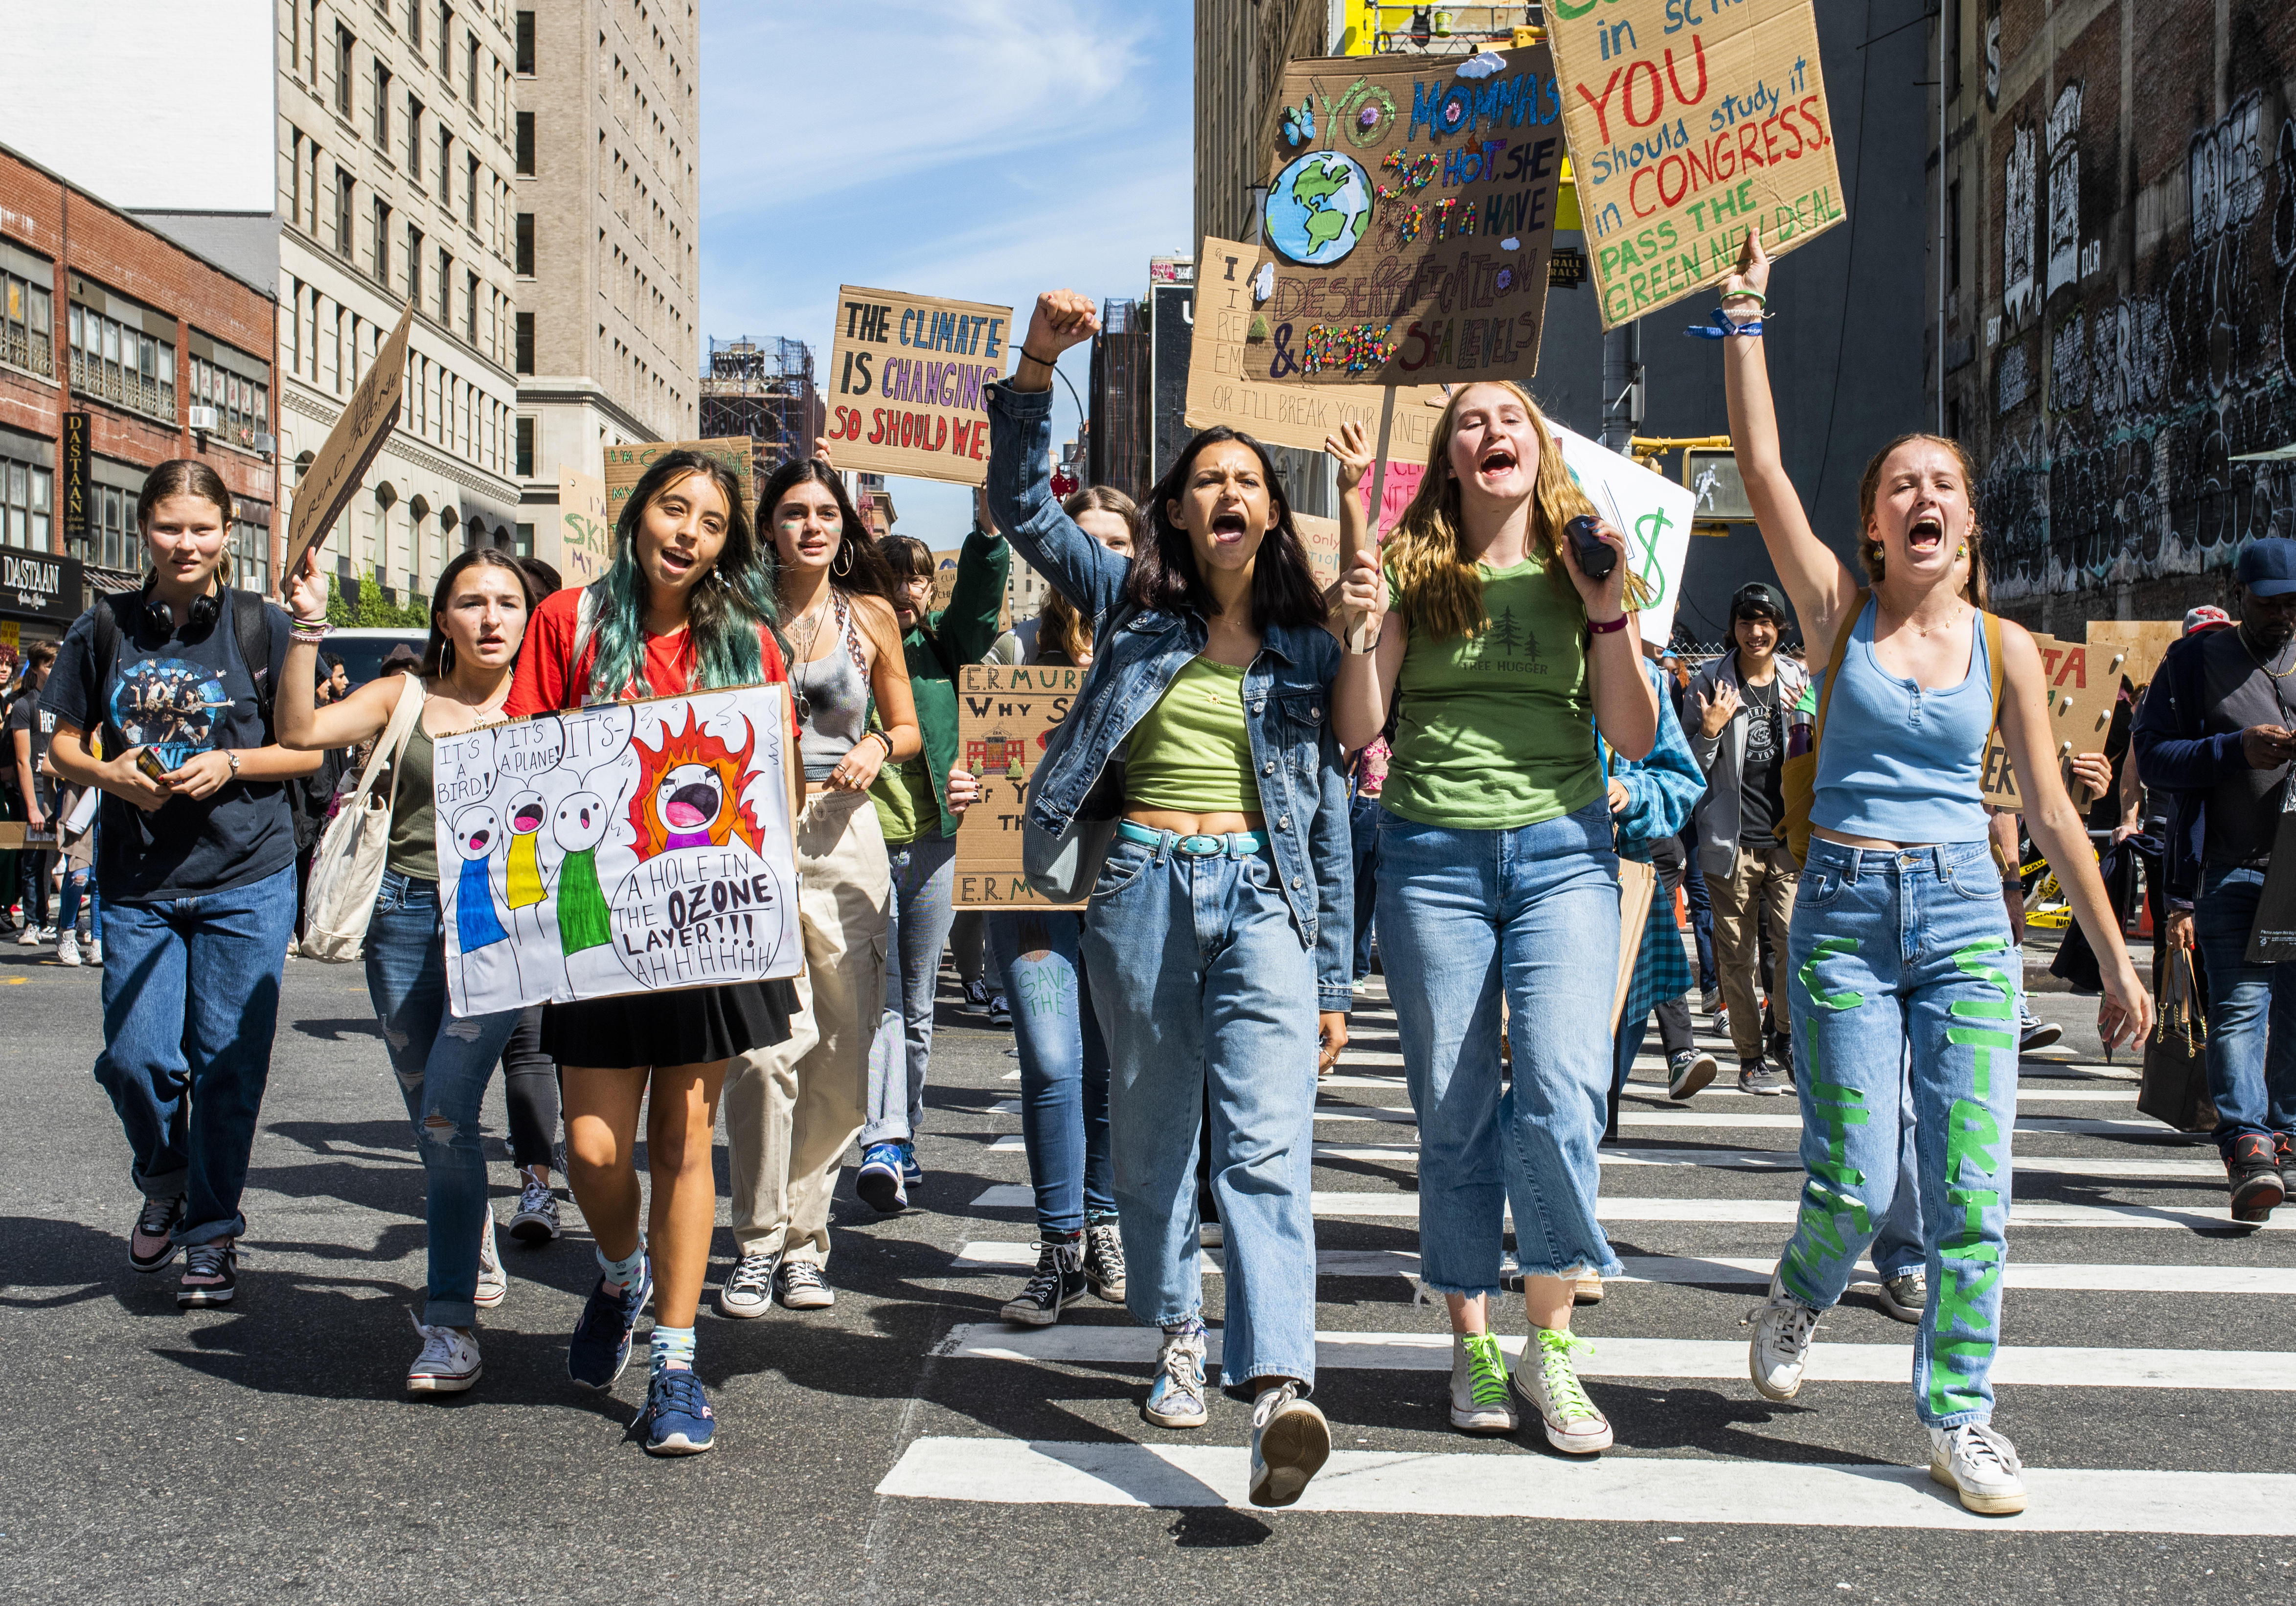 Edward R. Murrow students head south across Canal street towards Foley Square to join the thousands of other students and New Yorkers who were demanding action on climate change.